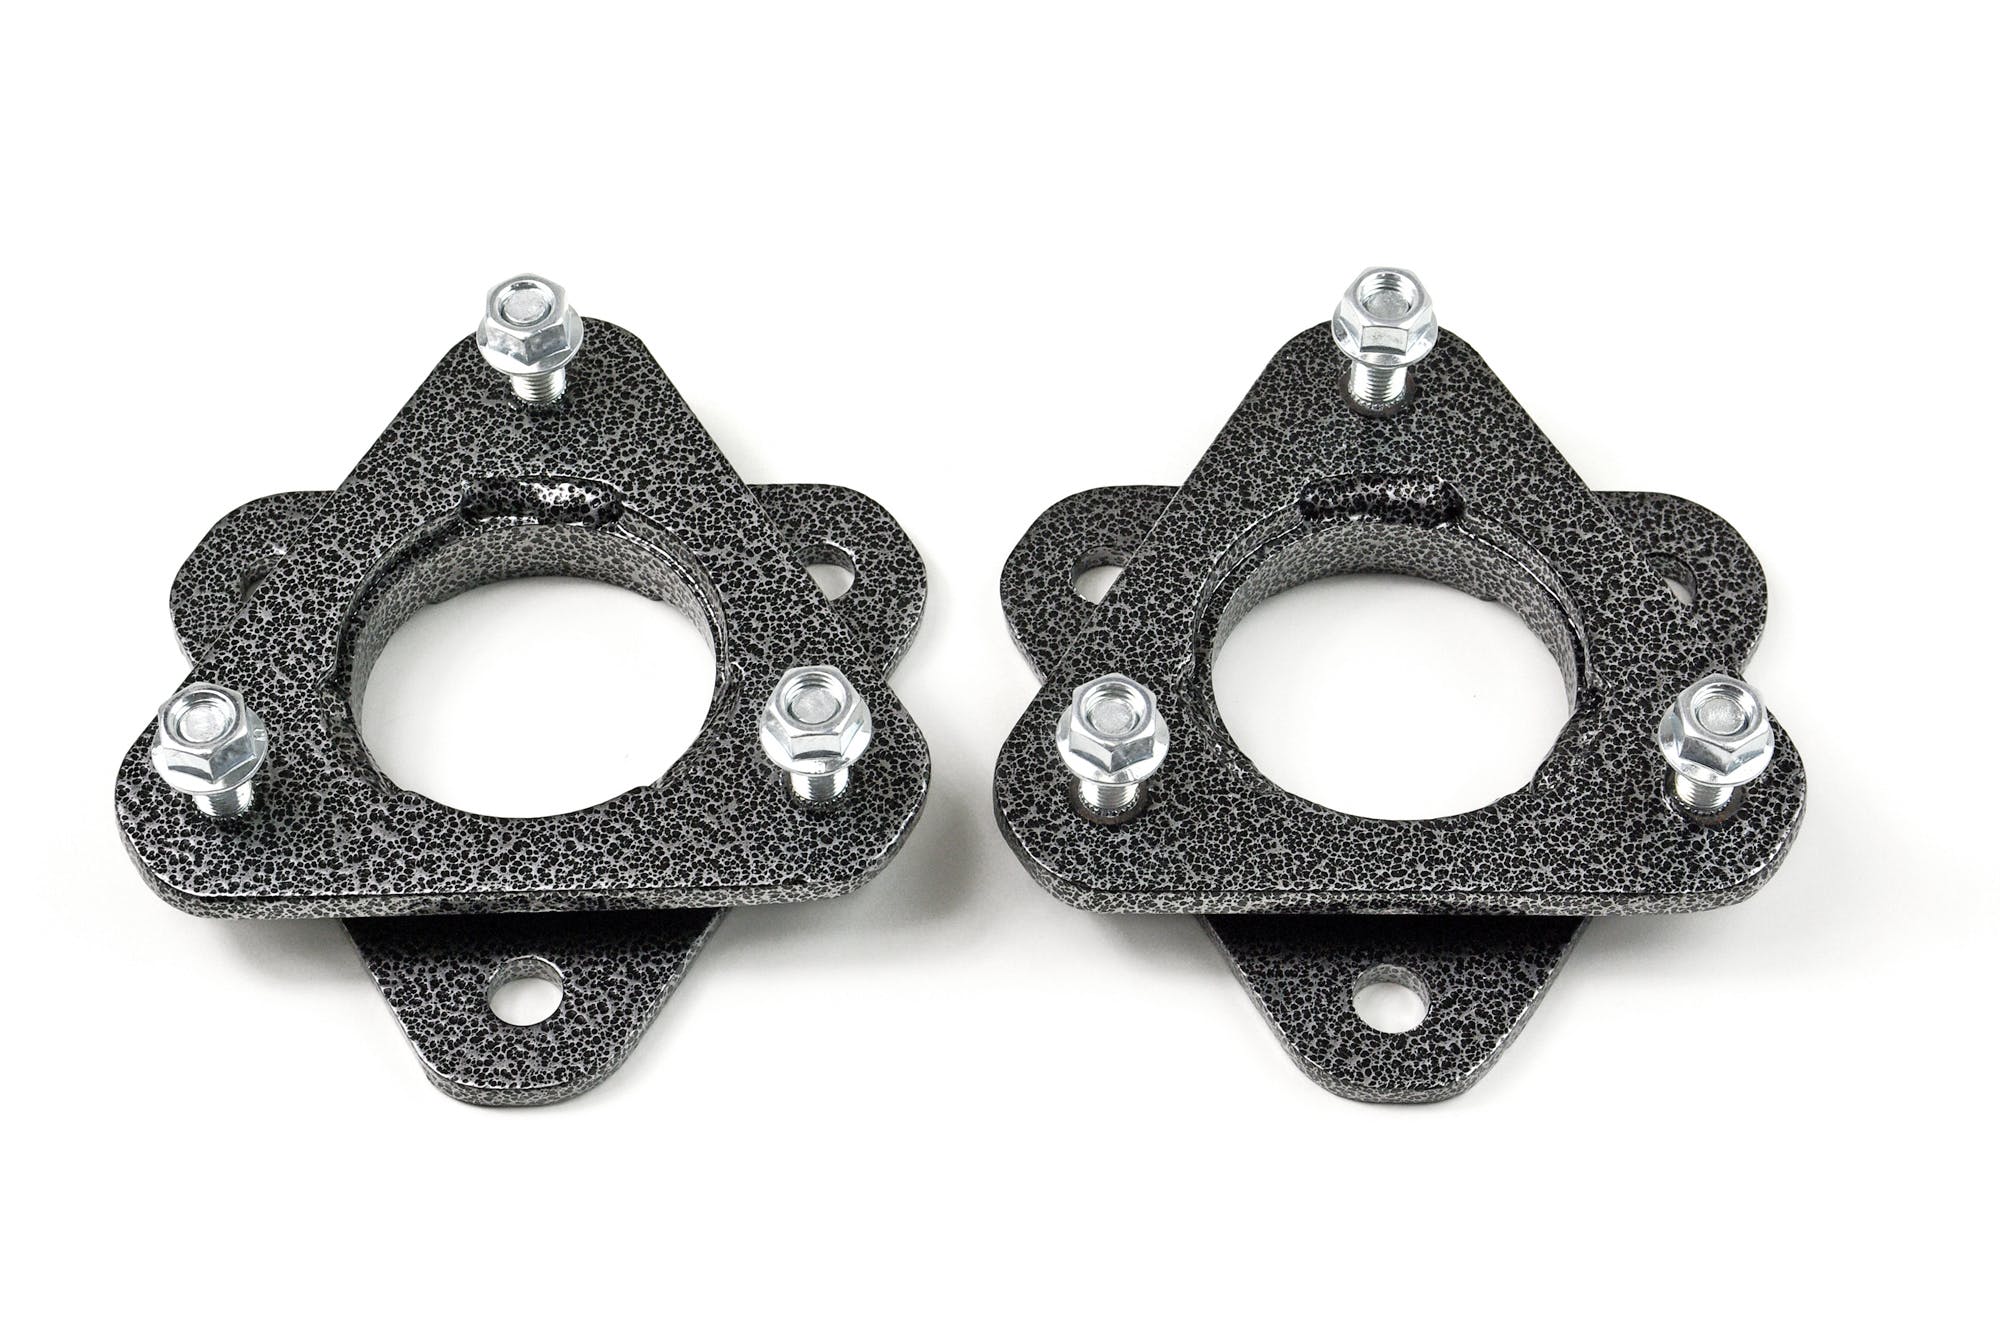 Rugged Off Road 6-101 Suspension Leveling Kit